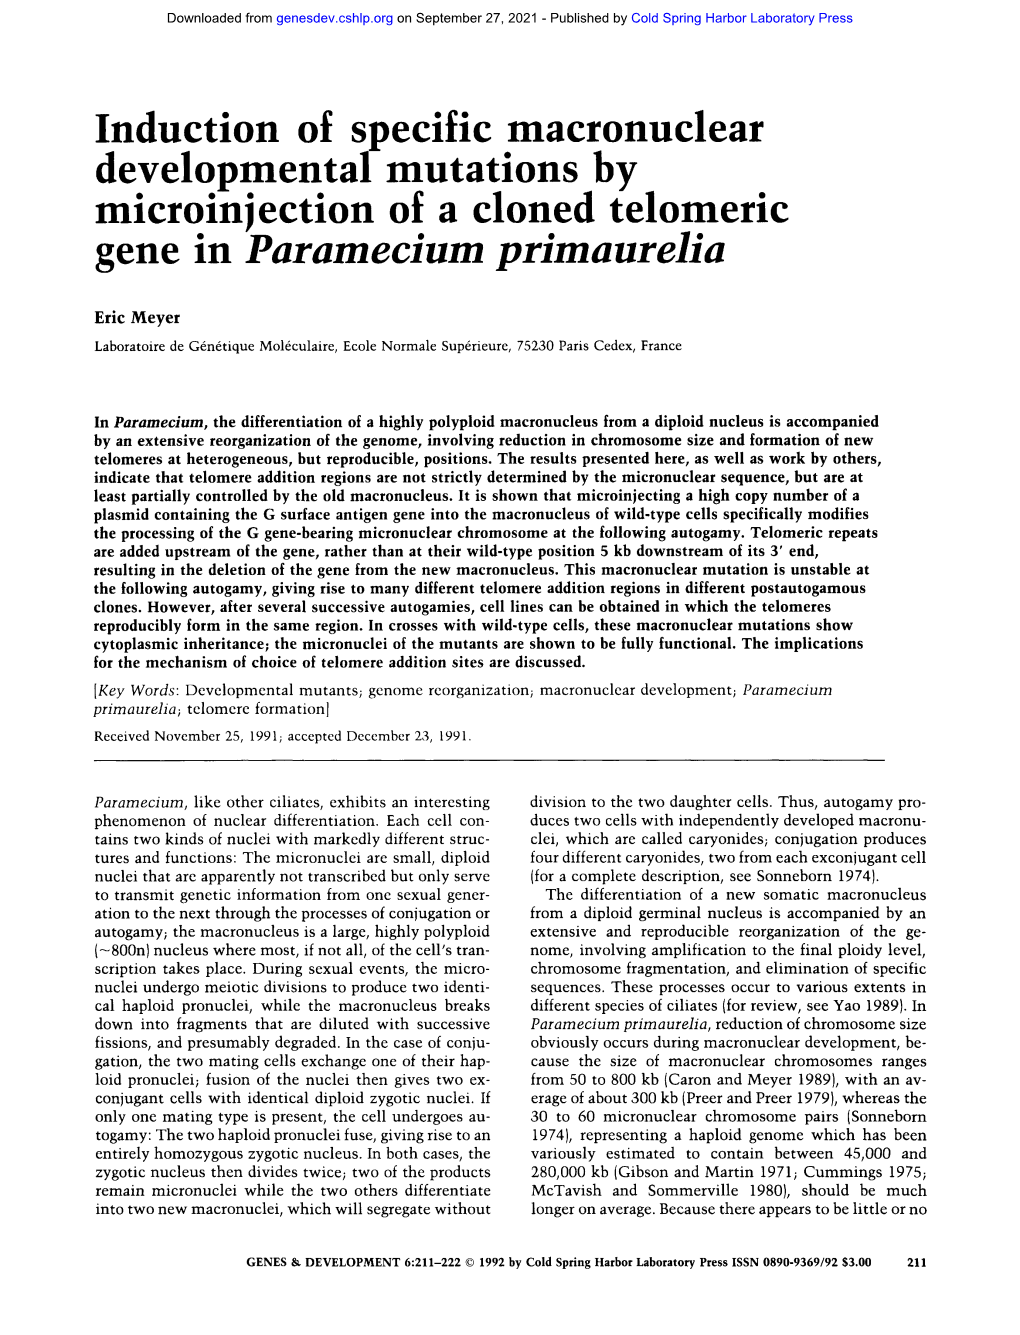 Induction of Specific Macronuclear Developmental Mutations by Microinjection of a Cloned Telomeric Gene in Paramecium Primaurelia